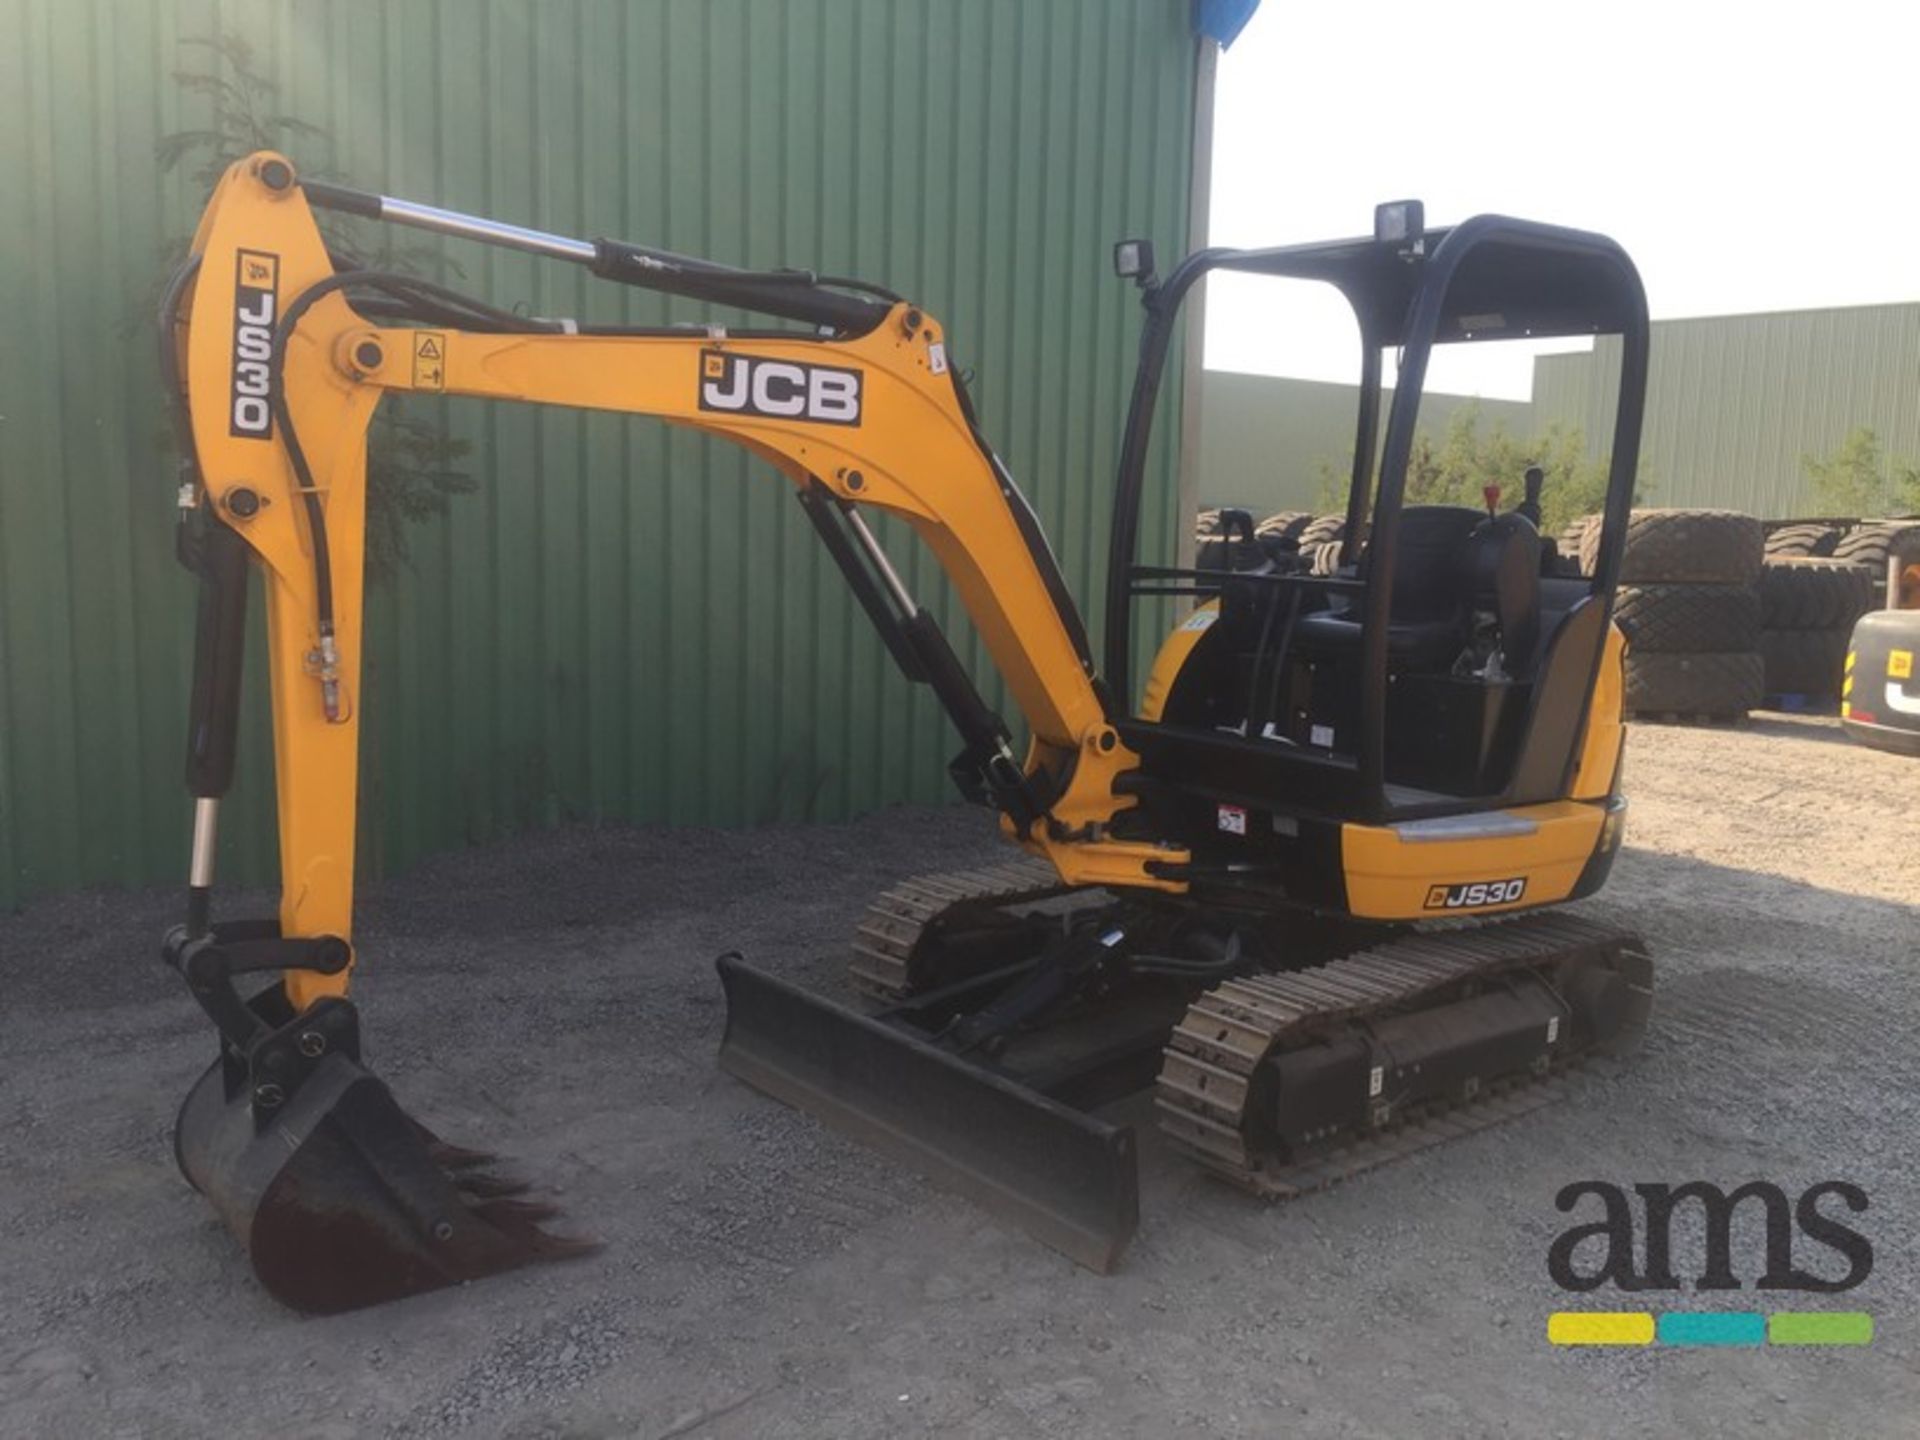 *FOR EXPORT ONLY* 2014, JCB 8026CTS Excavator, Serial No. 305249 c/w Steel Tracks, Single Auxiliary, - Image 3 of 18